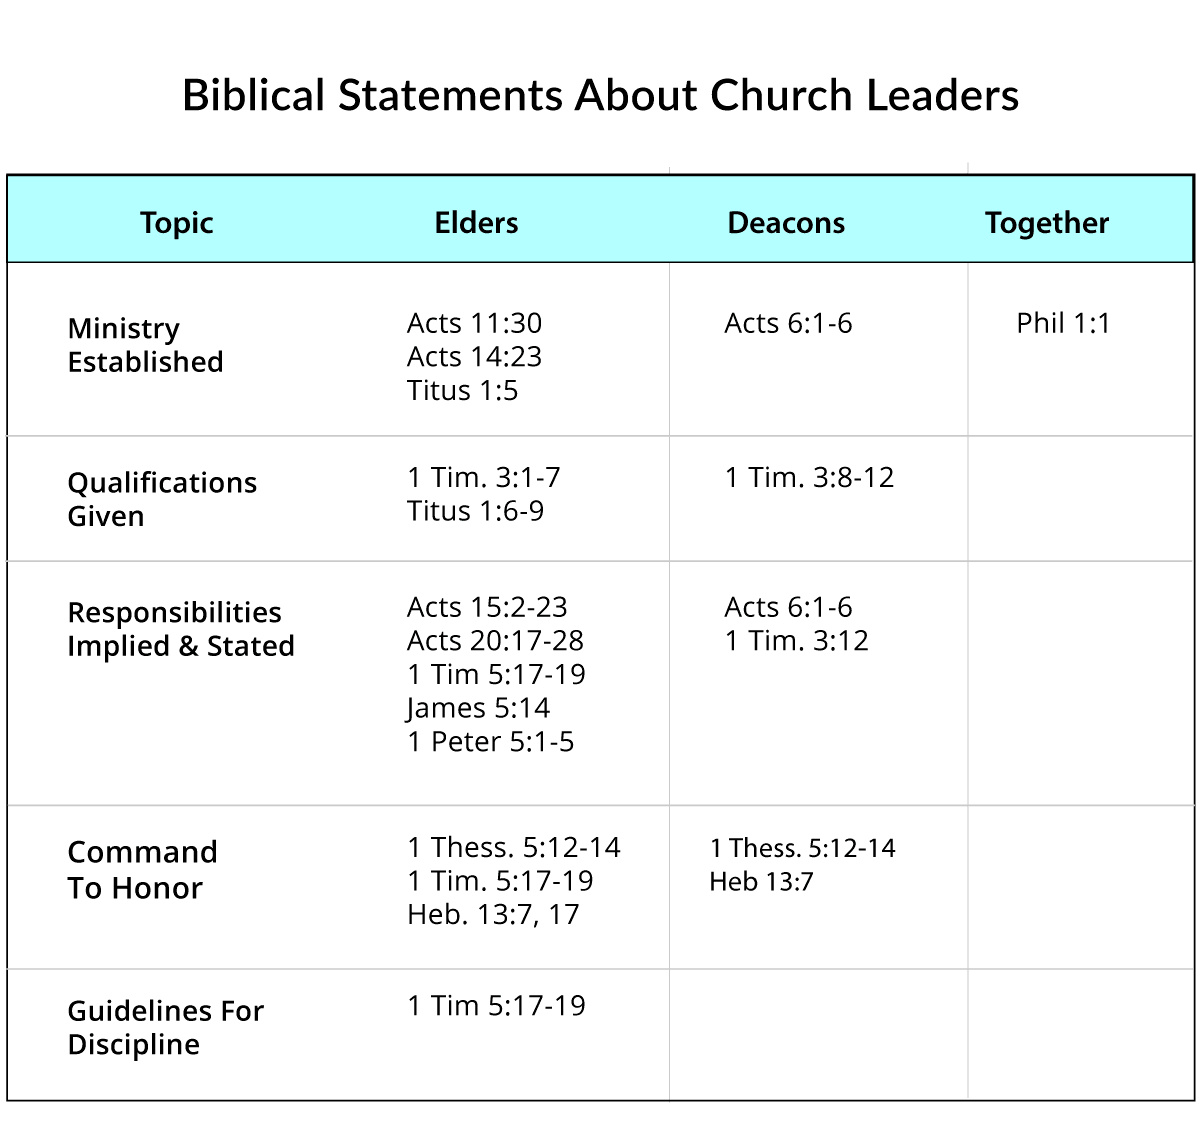 Biblical Statements About Church Leaders